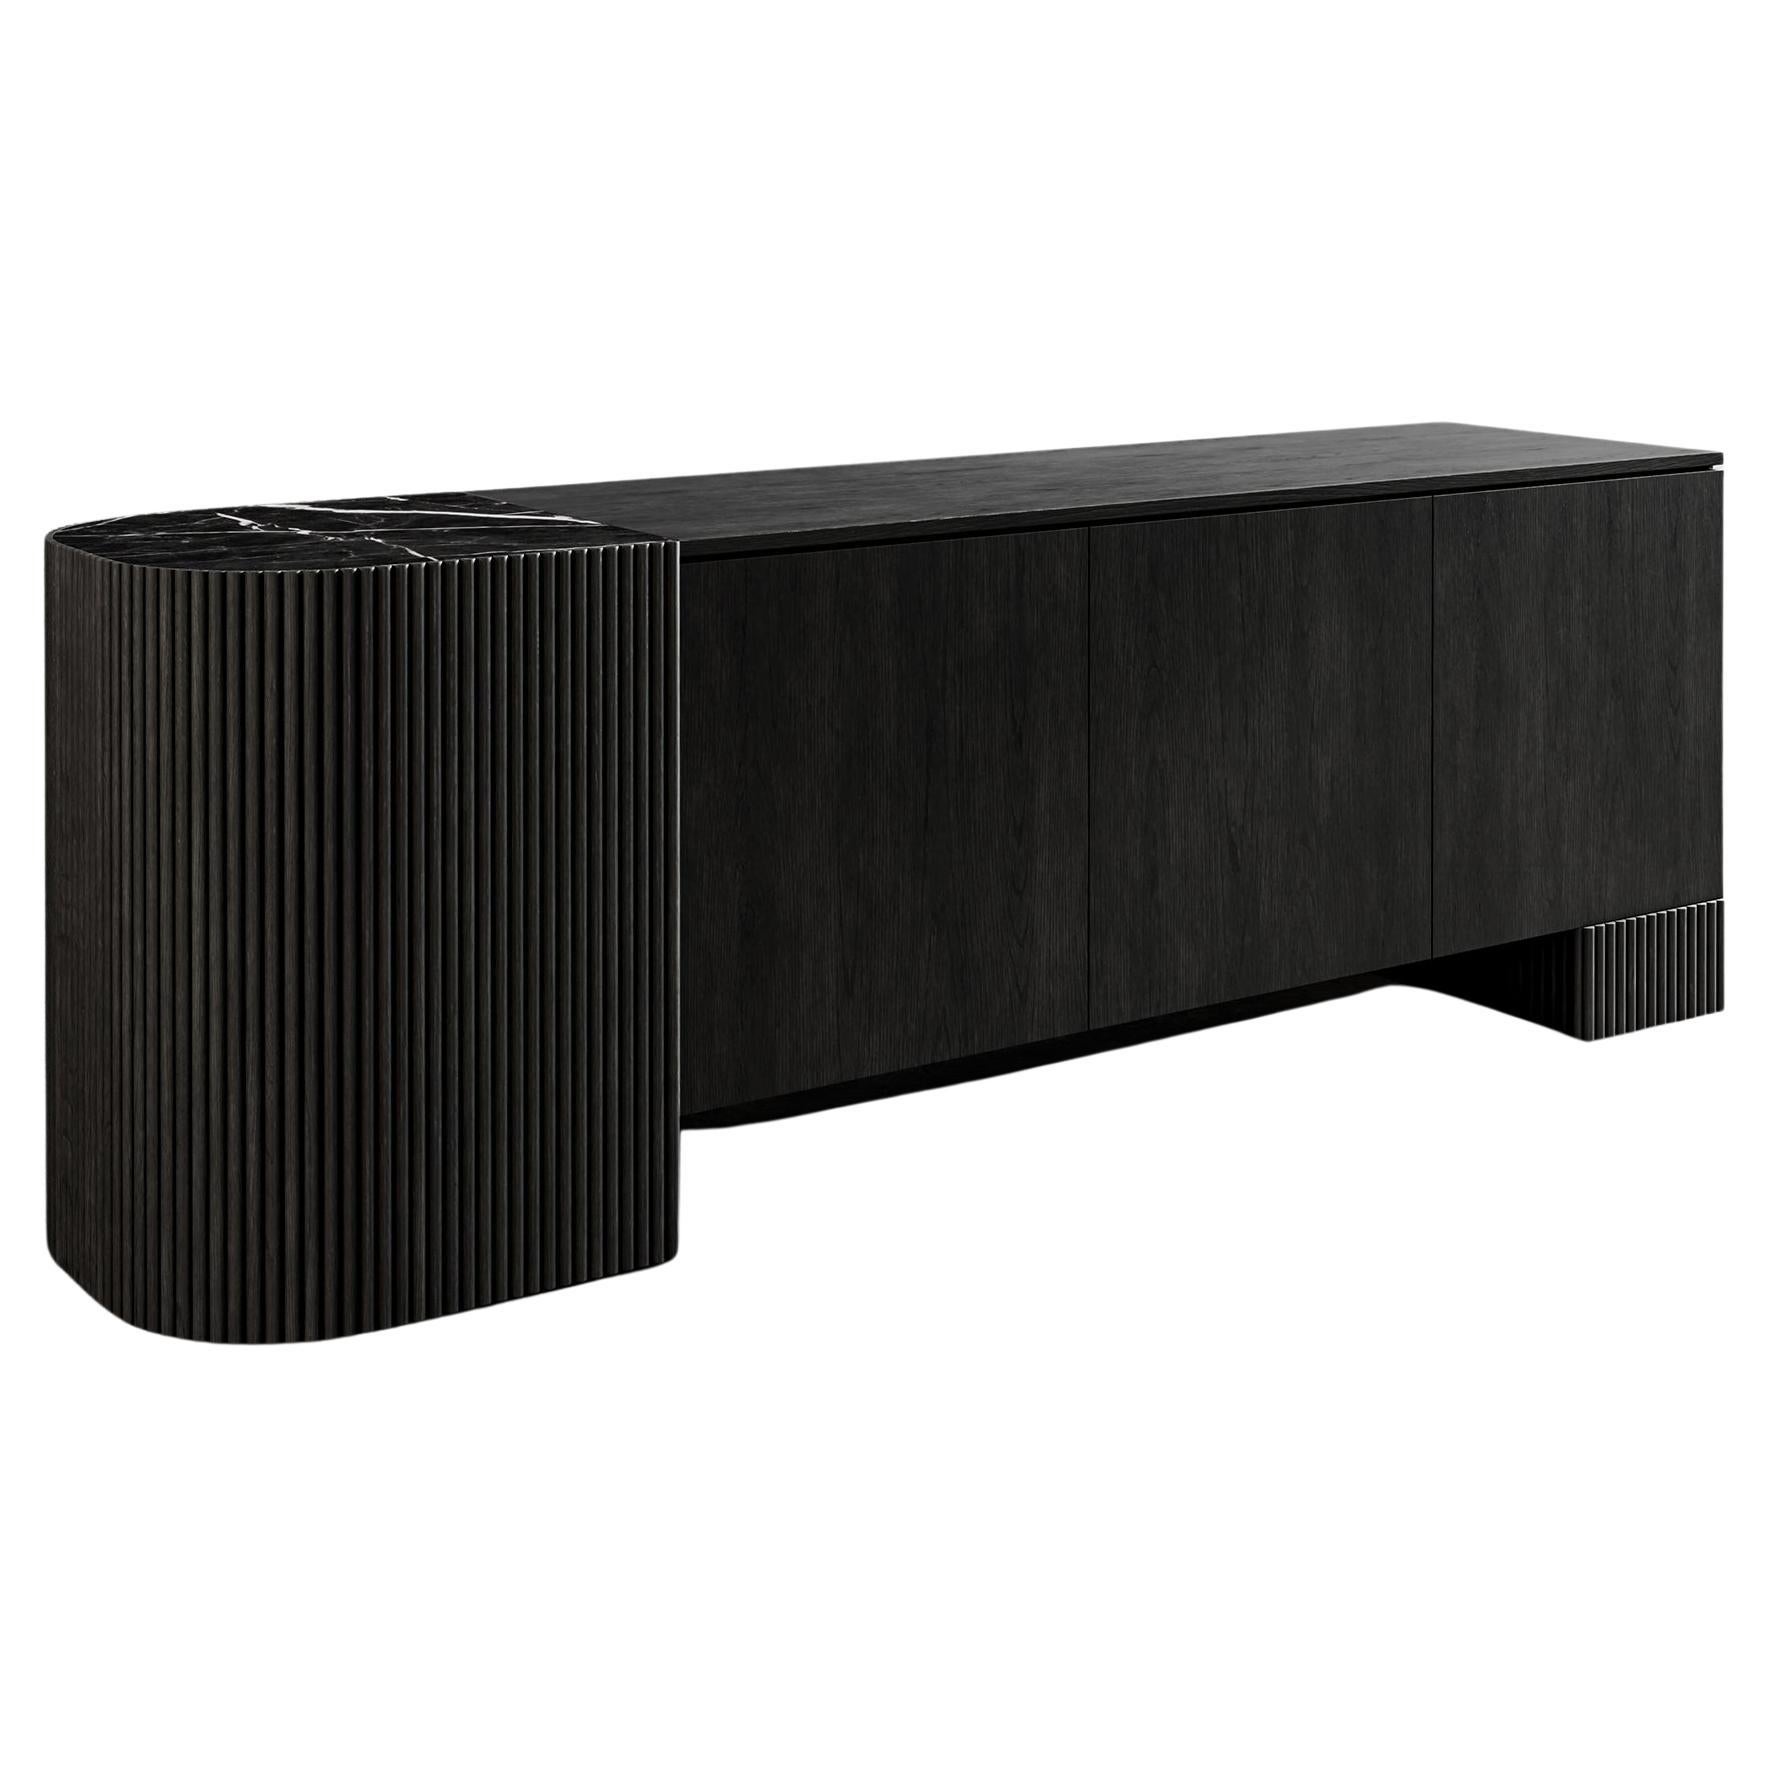 SWAY CREDENZA - Modern Design with Ebony Oak + Nero Marquina Marble For Sale